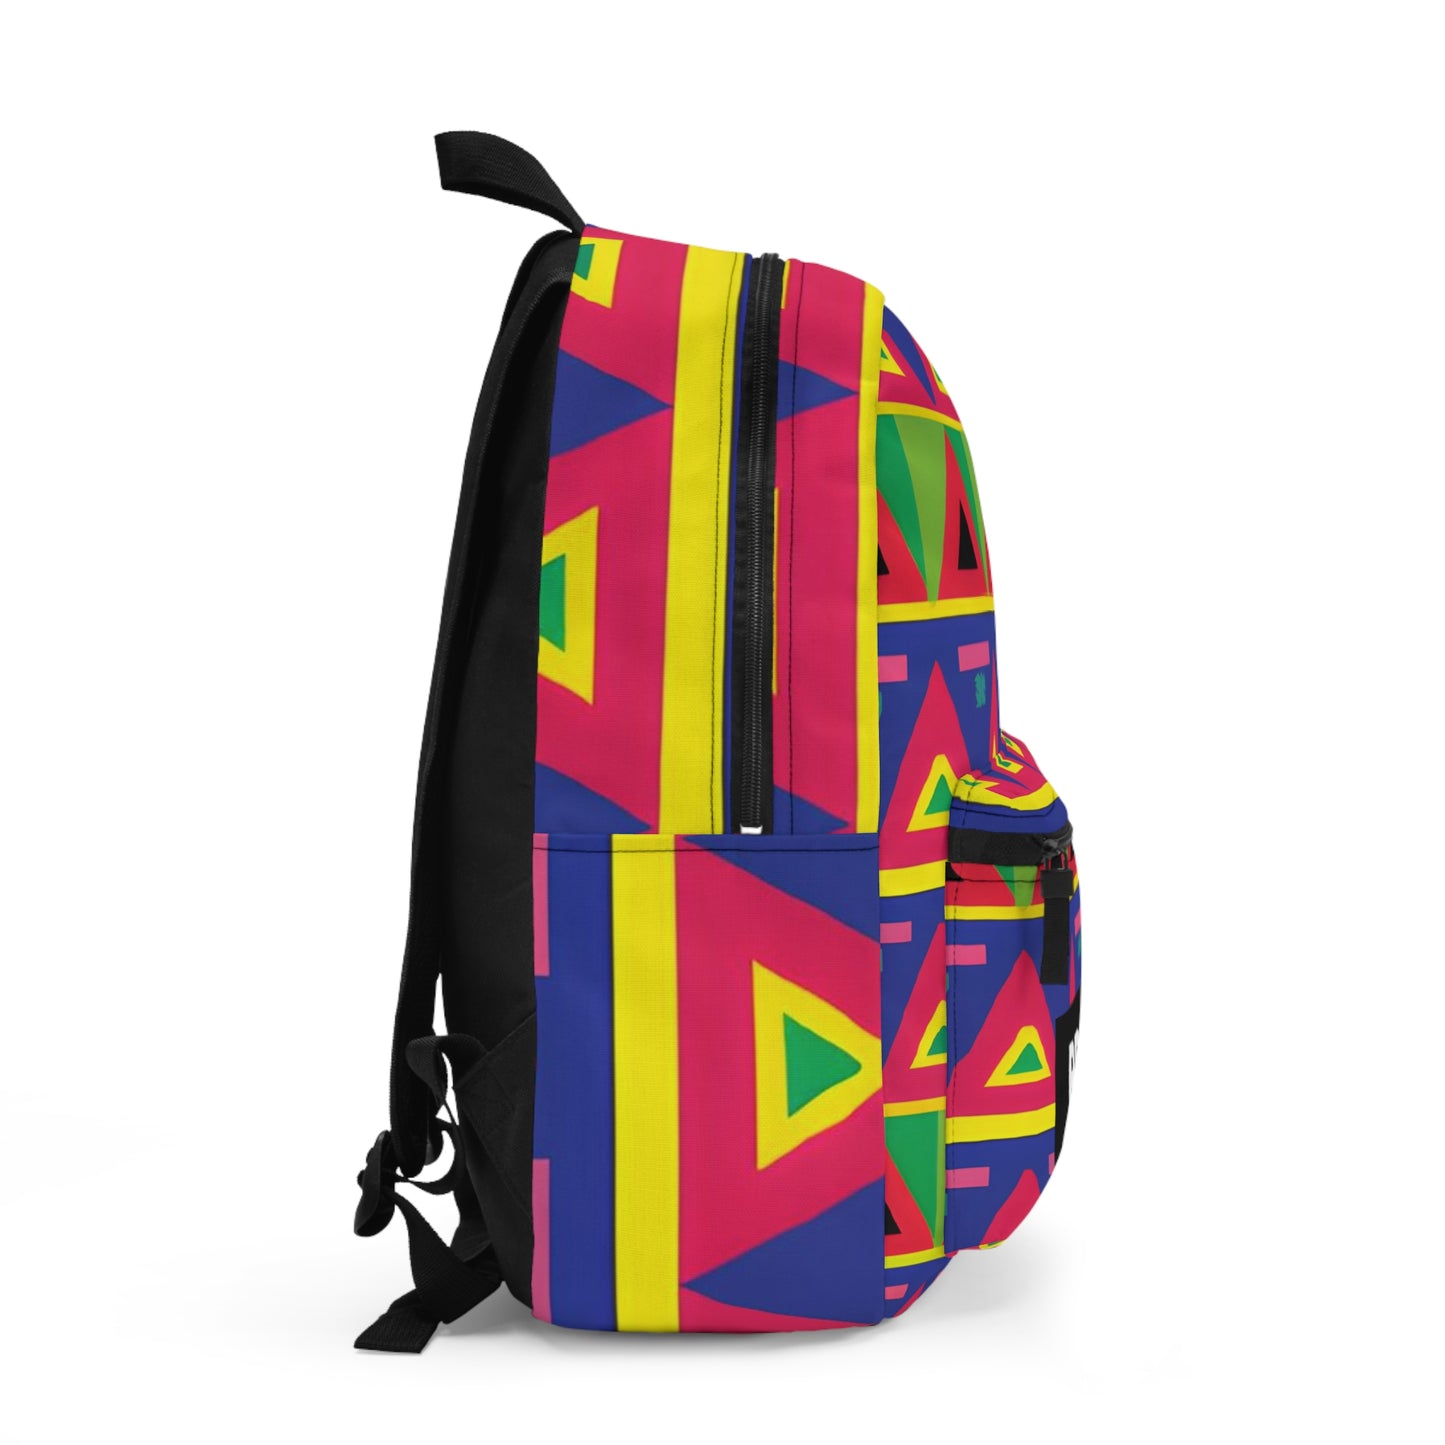 SynthiaSparkle - Gay Pride Backpack